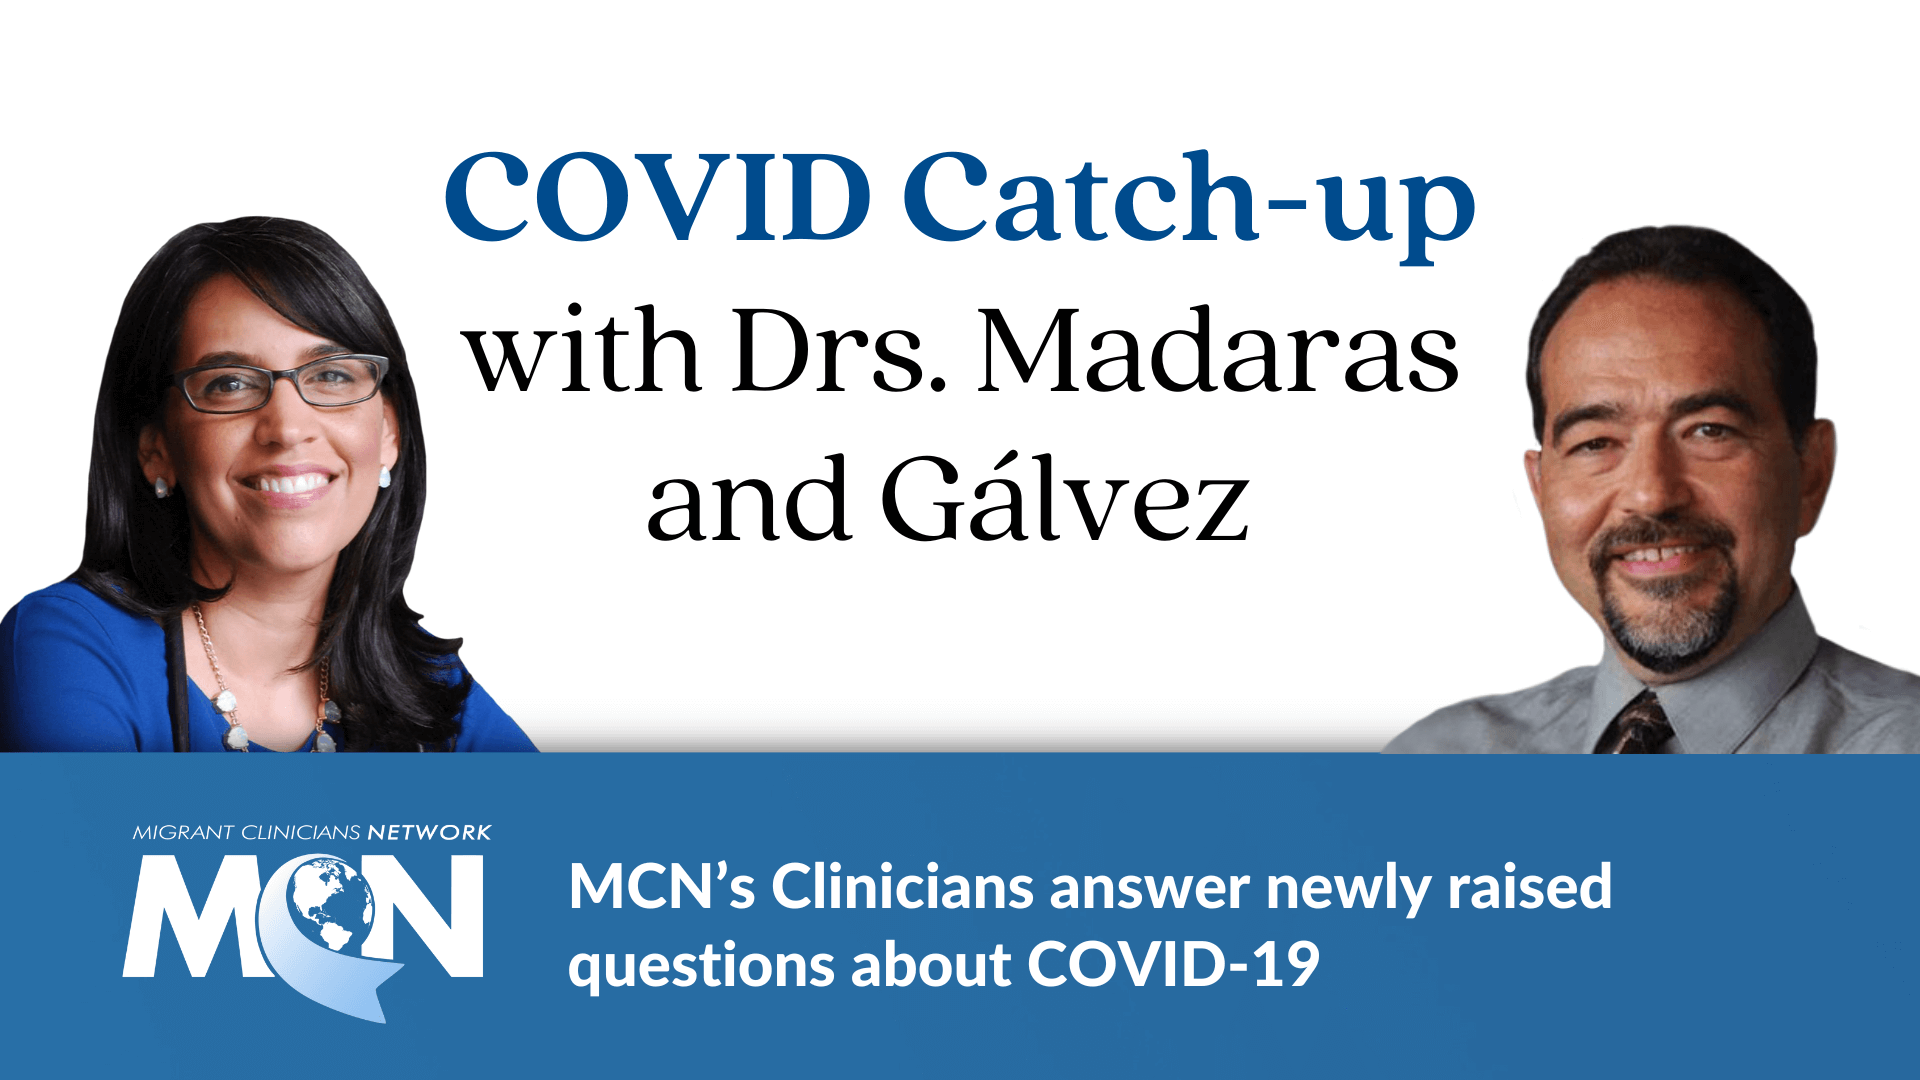 COVID Catch-up with Dr. Madaras and Dr. Gálvez